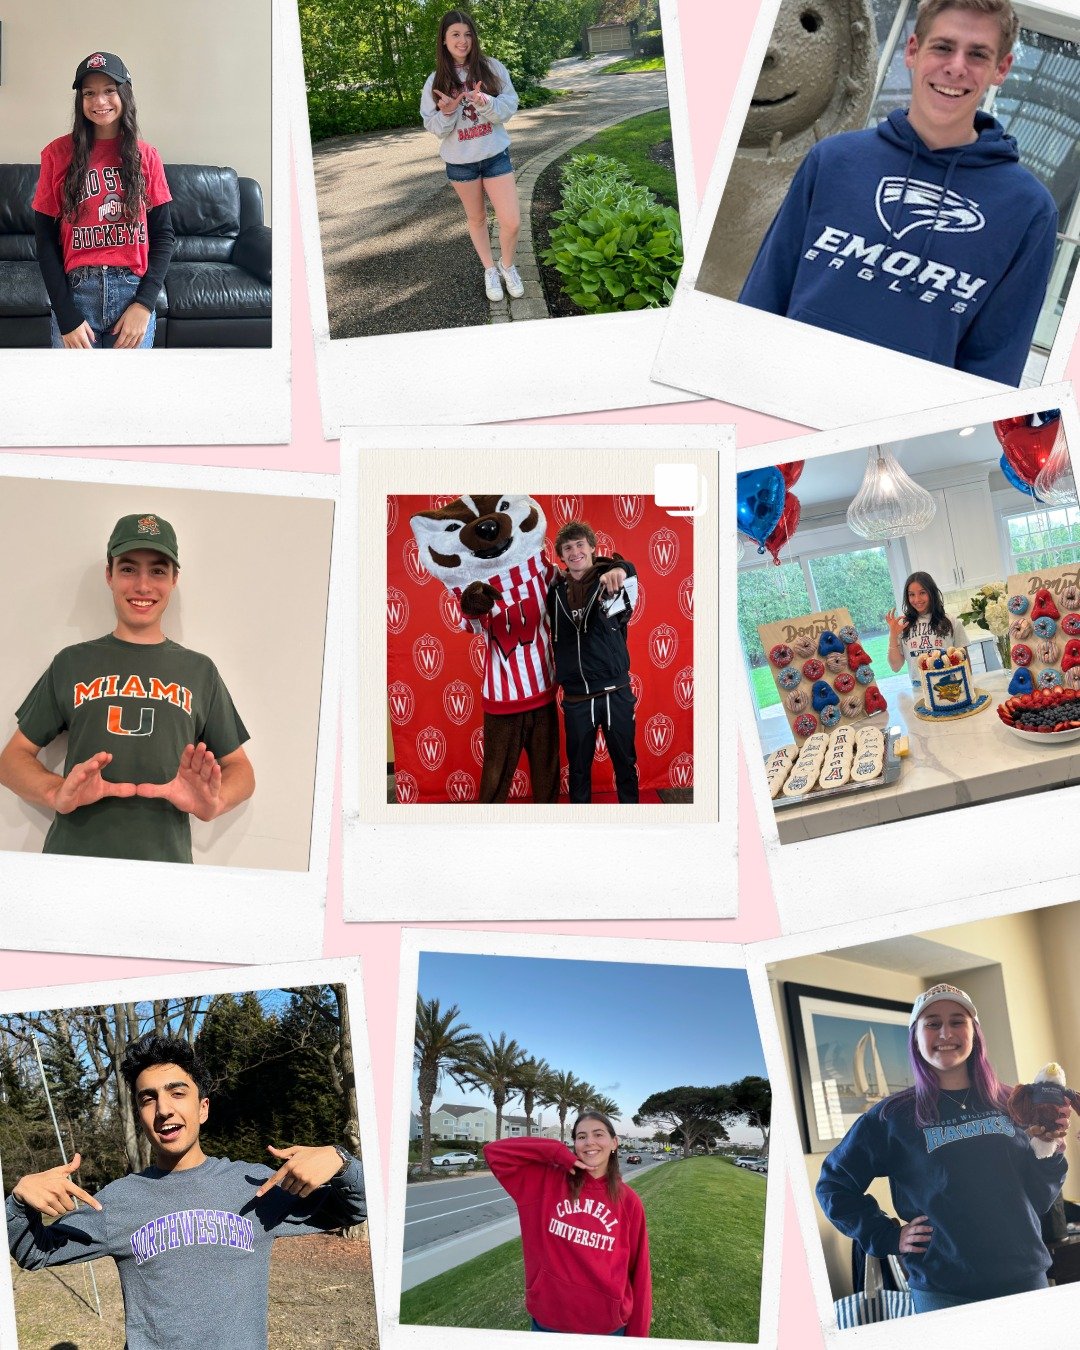 Check out where some of our amazing students are heading next! 🎓 They're proudly representing their new colleges as they embark on their exciting journeys. We couldn't be happier for each and every one of them! 🌟 #collegebound